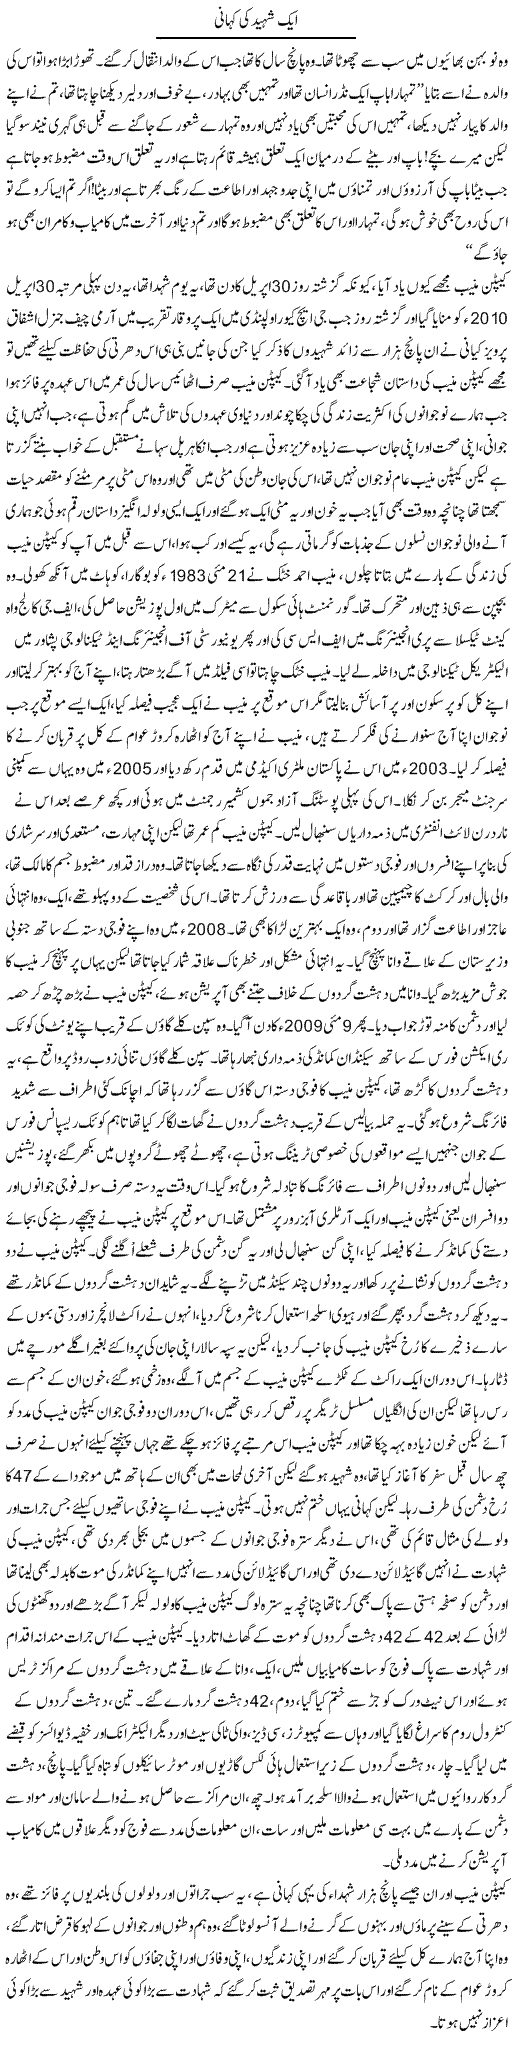 Story of a Martyr Express Column Amad Chaudhry 1st May 2011